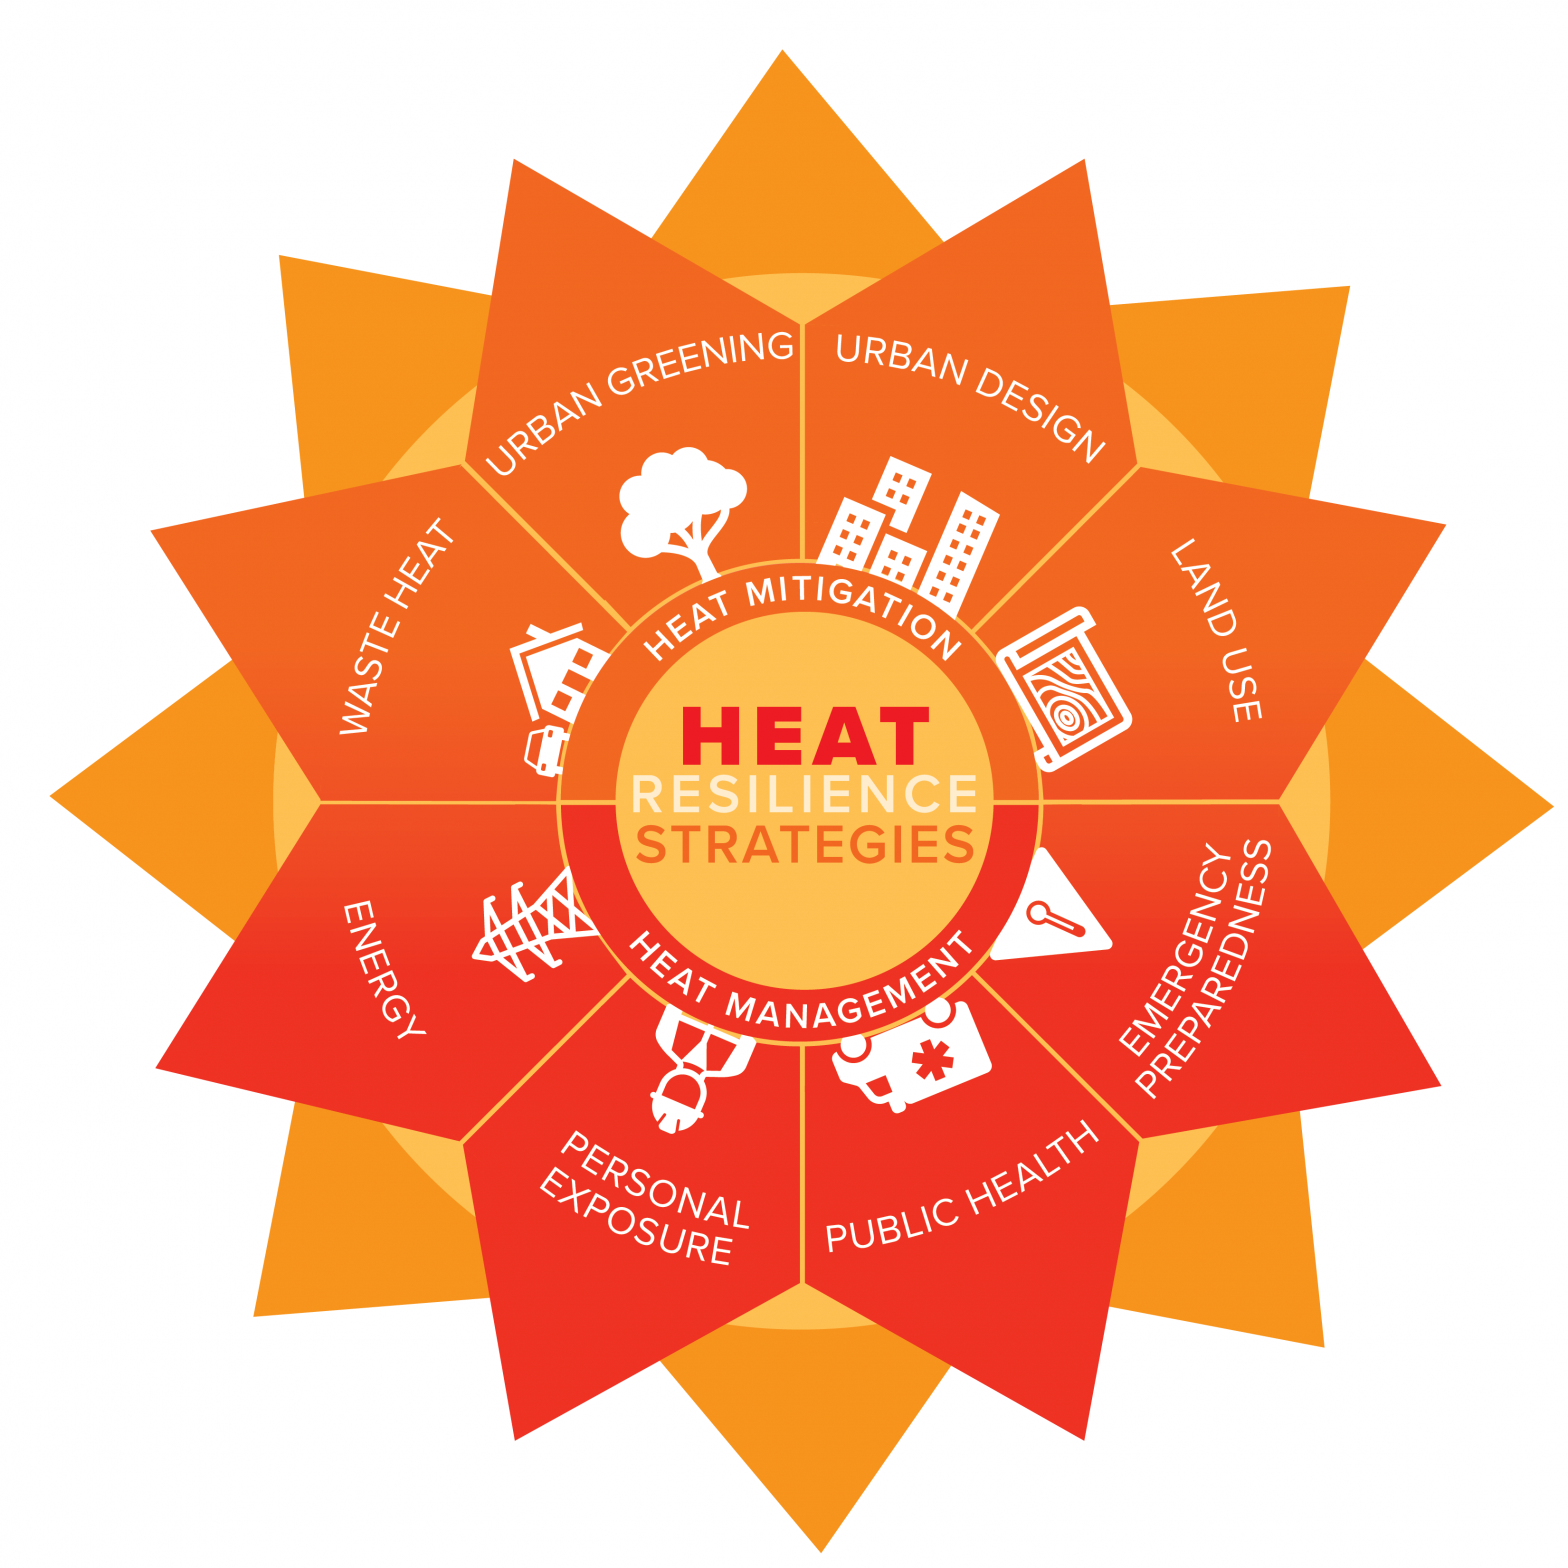 Planning for Extreme Heat: A National Survey of U.S. Planners